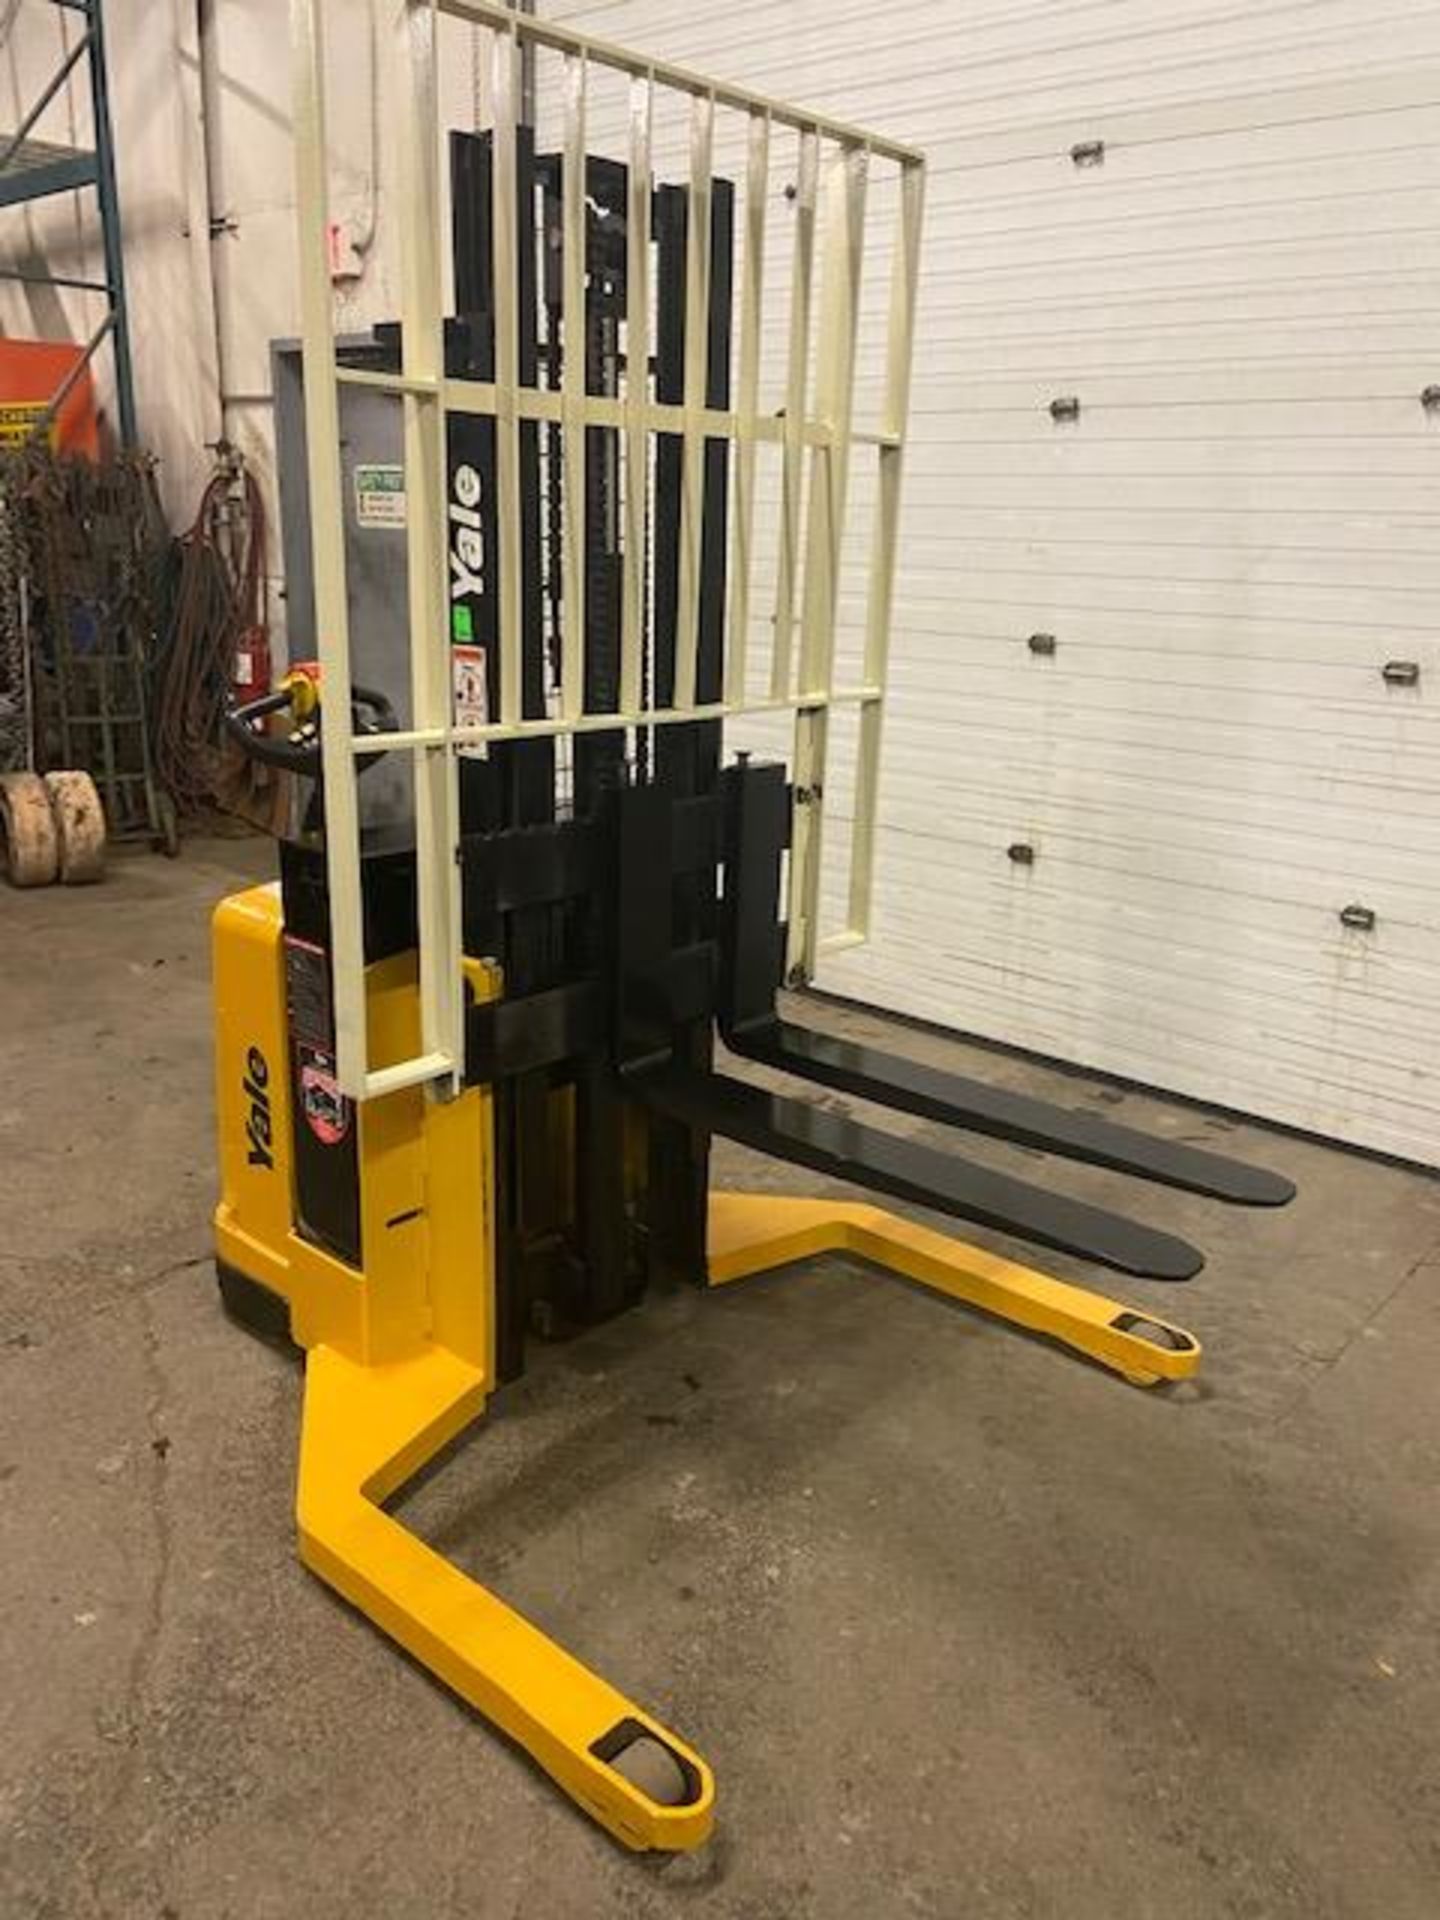 FREE CUSTOMS - 2008 Yale Order Picker 4000lbs capacity Electric Powered Pallet Cart Lifter with - Image 2 of 3